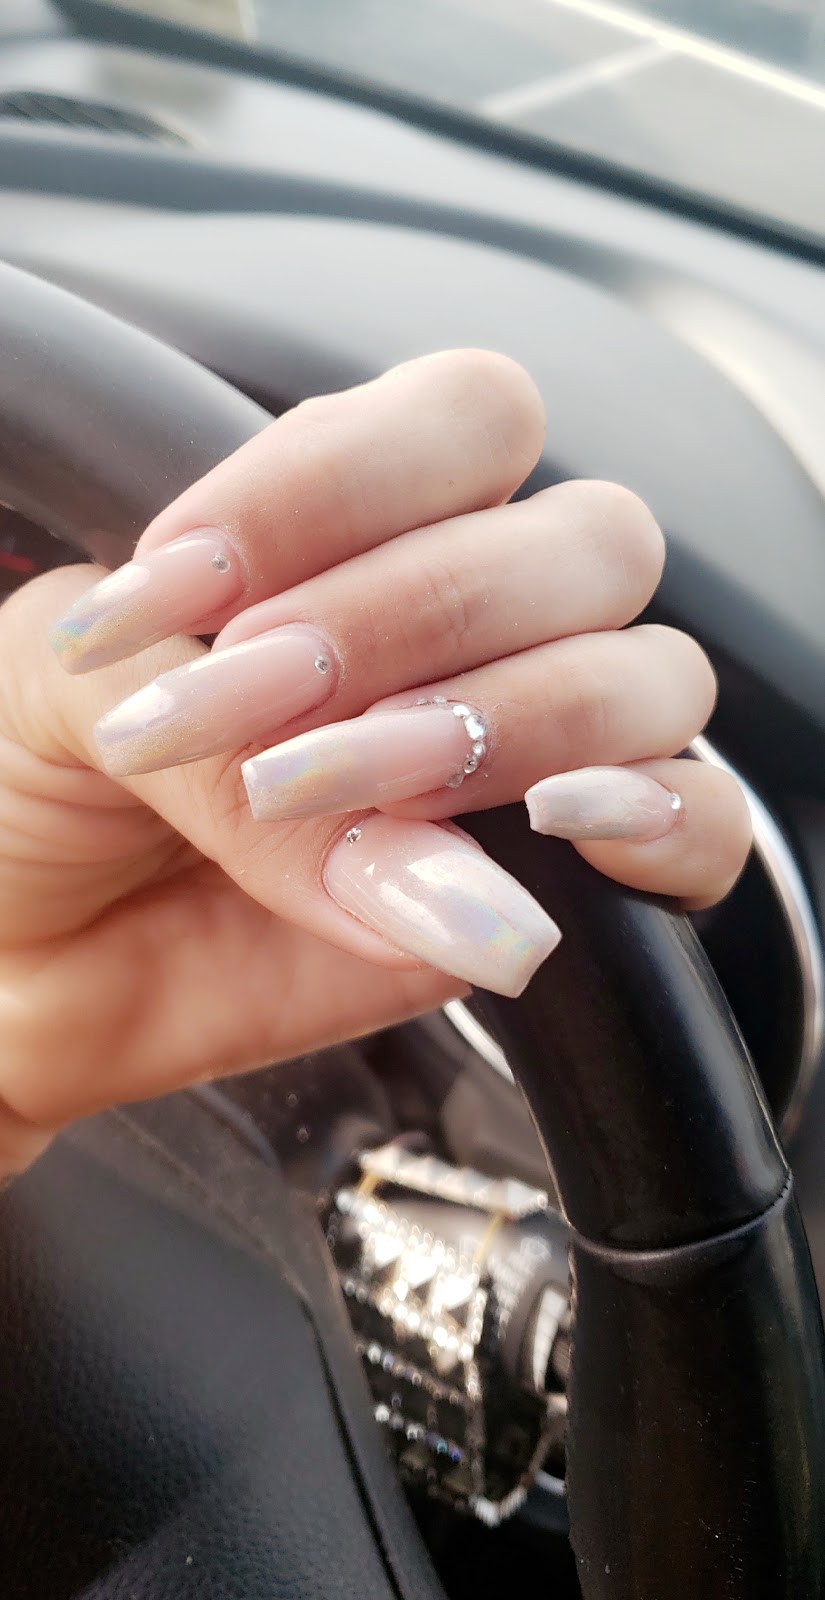 Nails to Perfection | Regal Plaza, 2209 US-9, Howell Township, NJ 07731 | Phone: (732) 625-7760